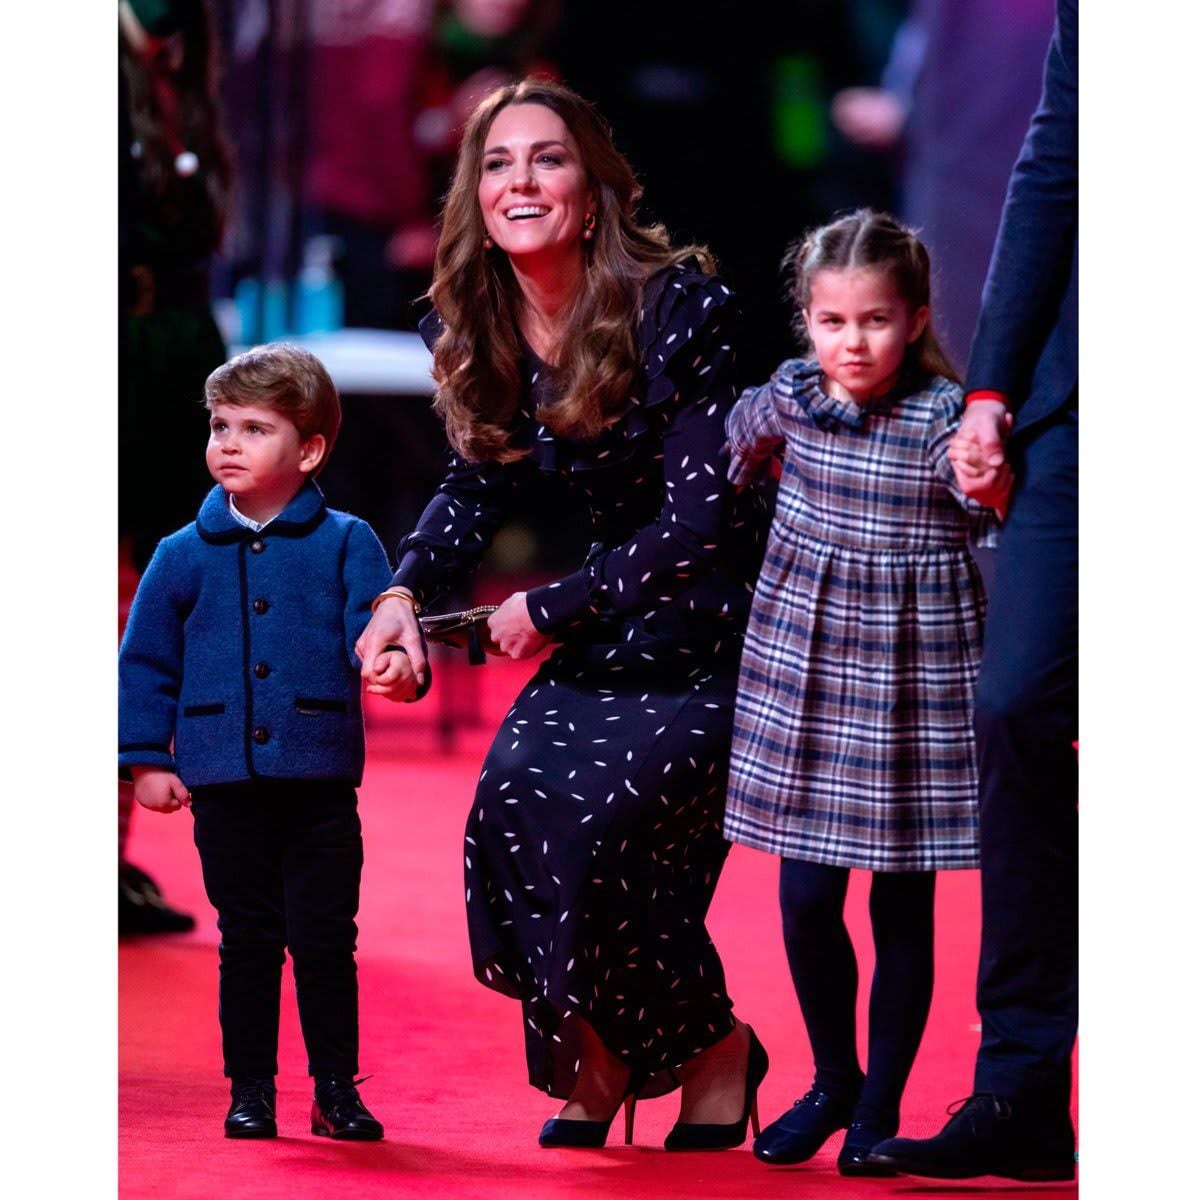 Hands-on Kate held hands with her youngest son, while Charlotte reached for her mother.